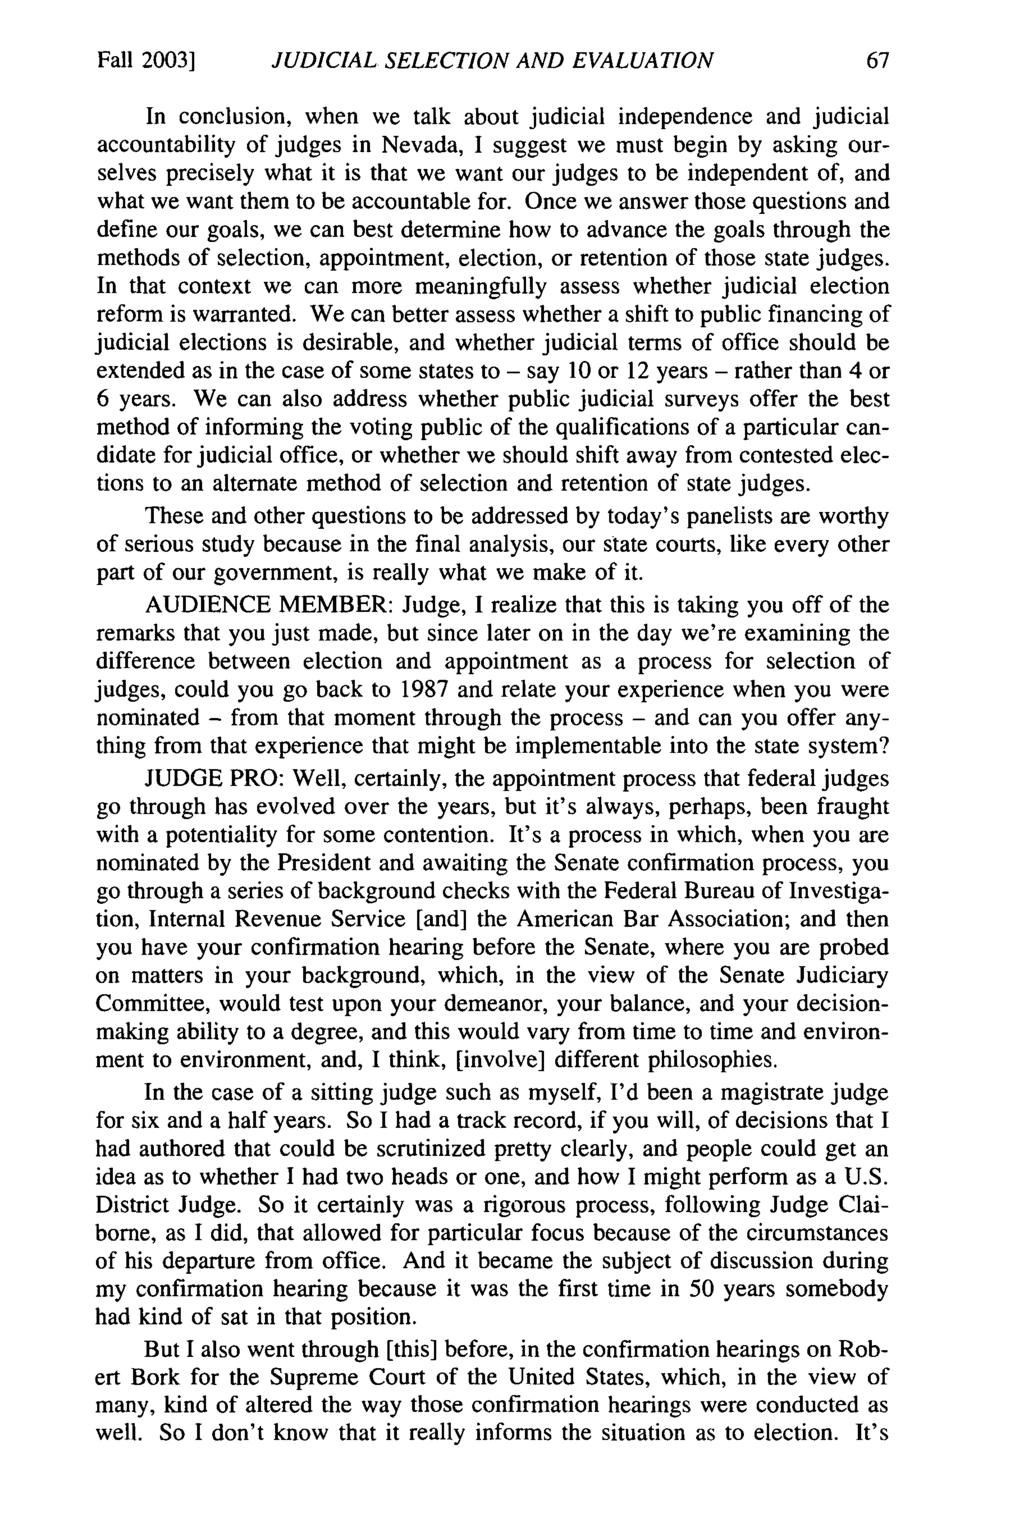 Fall 2003] JUDICIAL SELECTION AND EVALUATION In conclusion, when we talk about judicial independence and judicial accountability of judges in Nevada, I suggest we must begin by asking ourselves